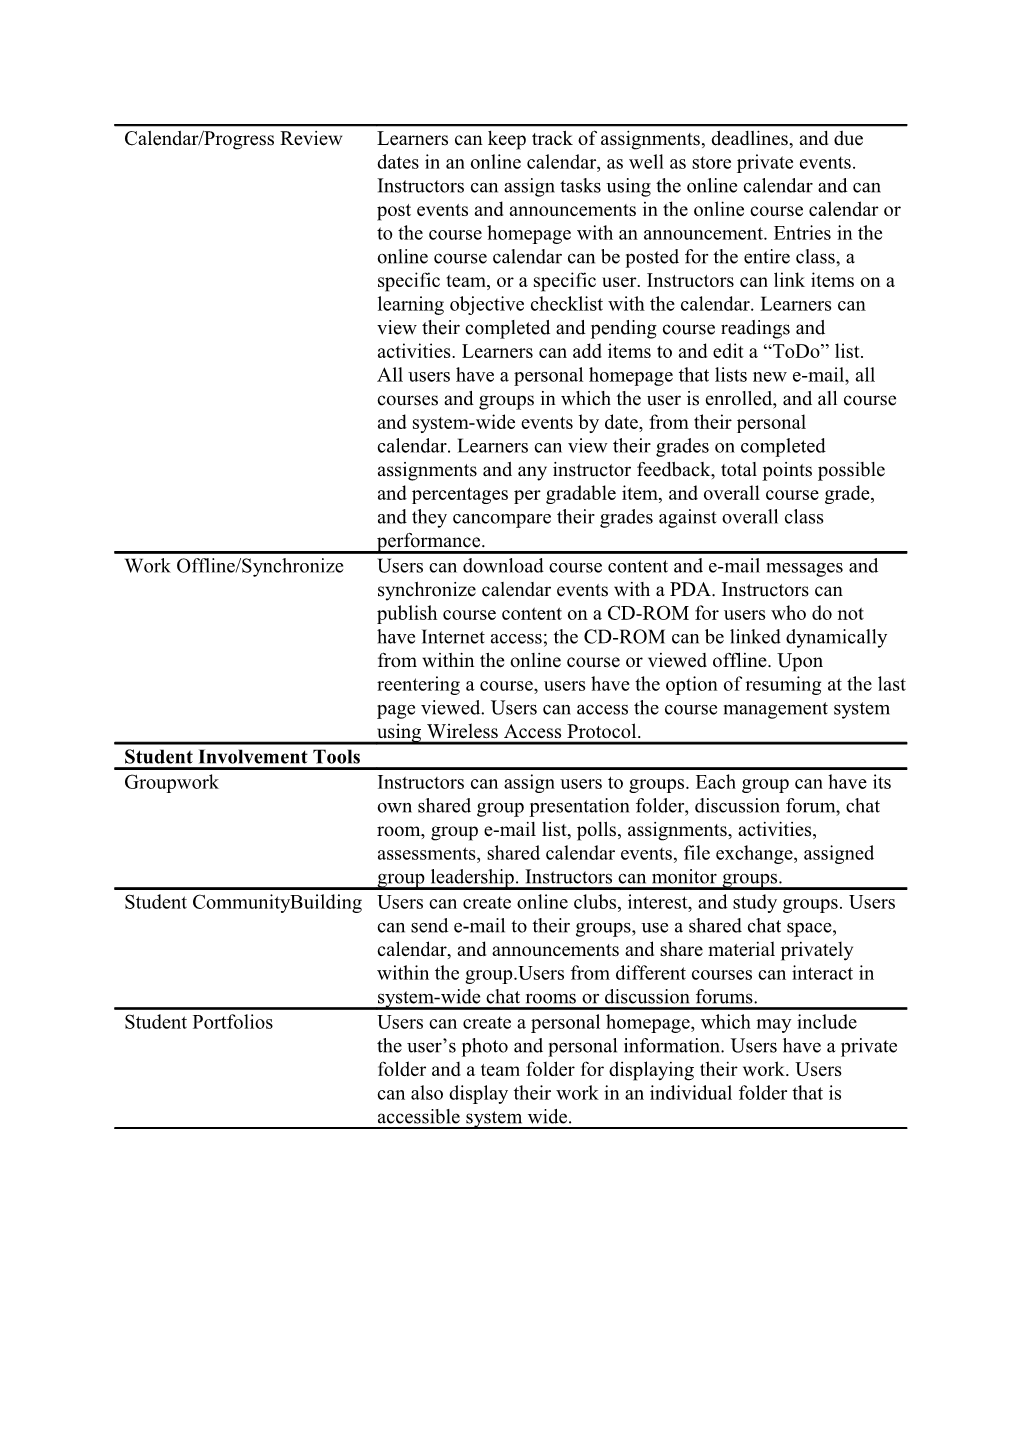 APPENDIX I, Deliverable A1 (August 1, 2004), Page6of6